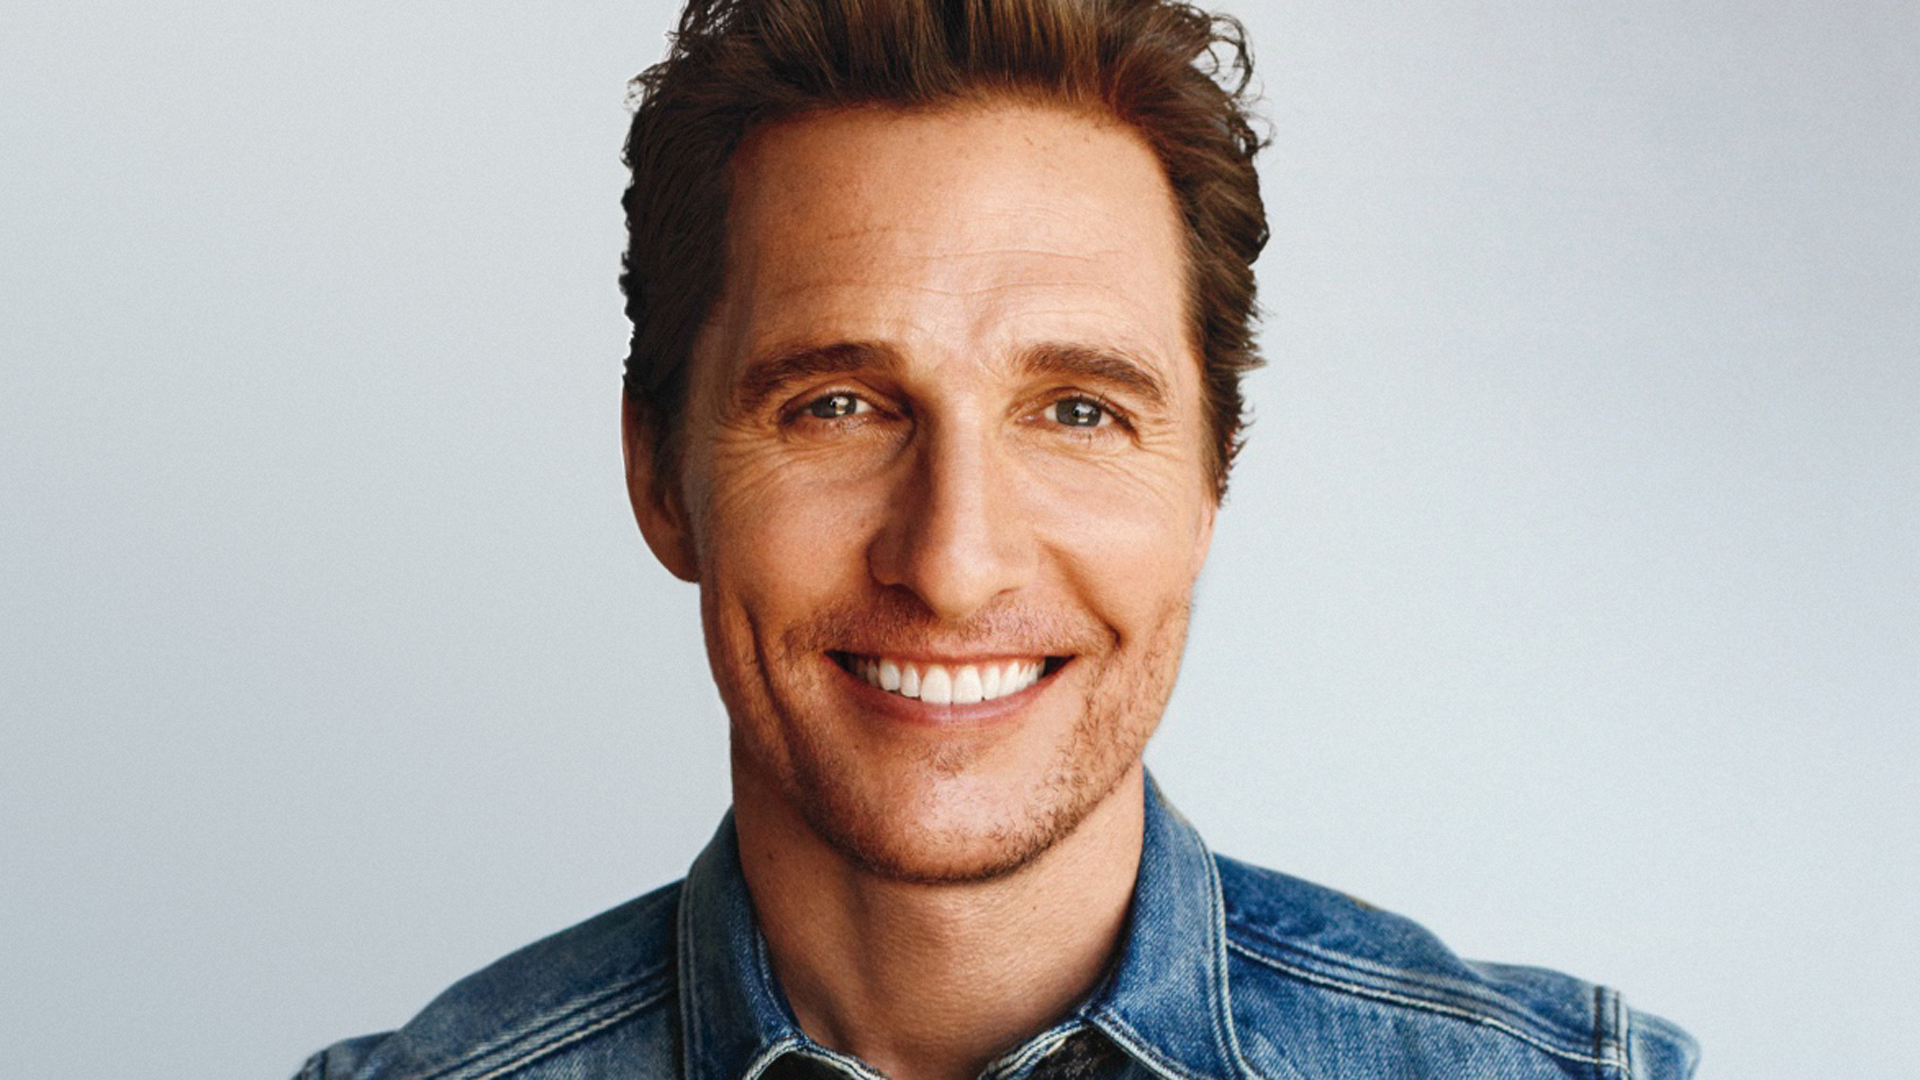 HD Quality Wallpaper | Collection: Celebrity, 1920x1080 Matthew McConaughey